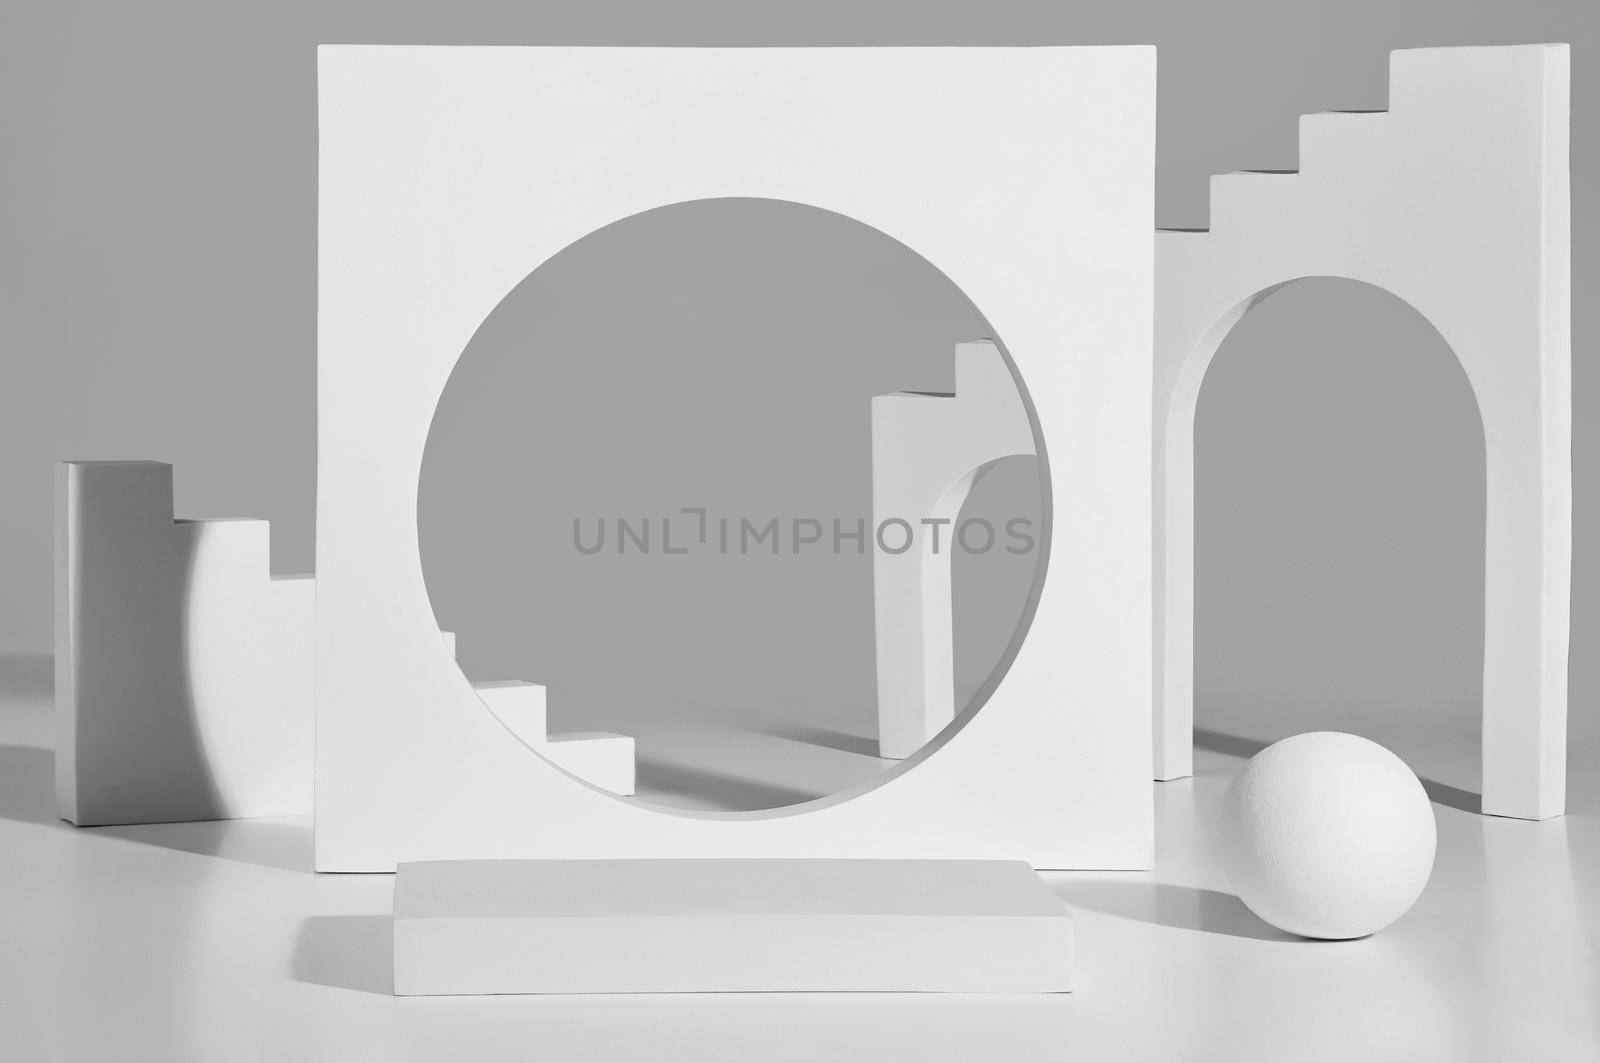 Empty square platform and geometric elements with steps, arched and round openings on gray background. Abstract showcase mockup for product presentation